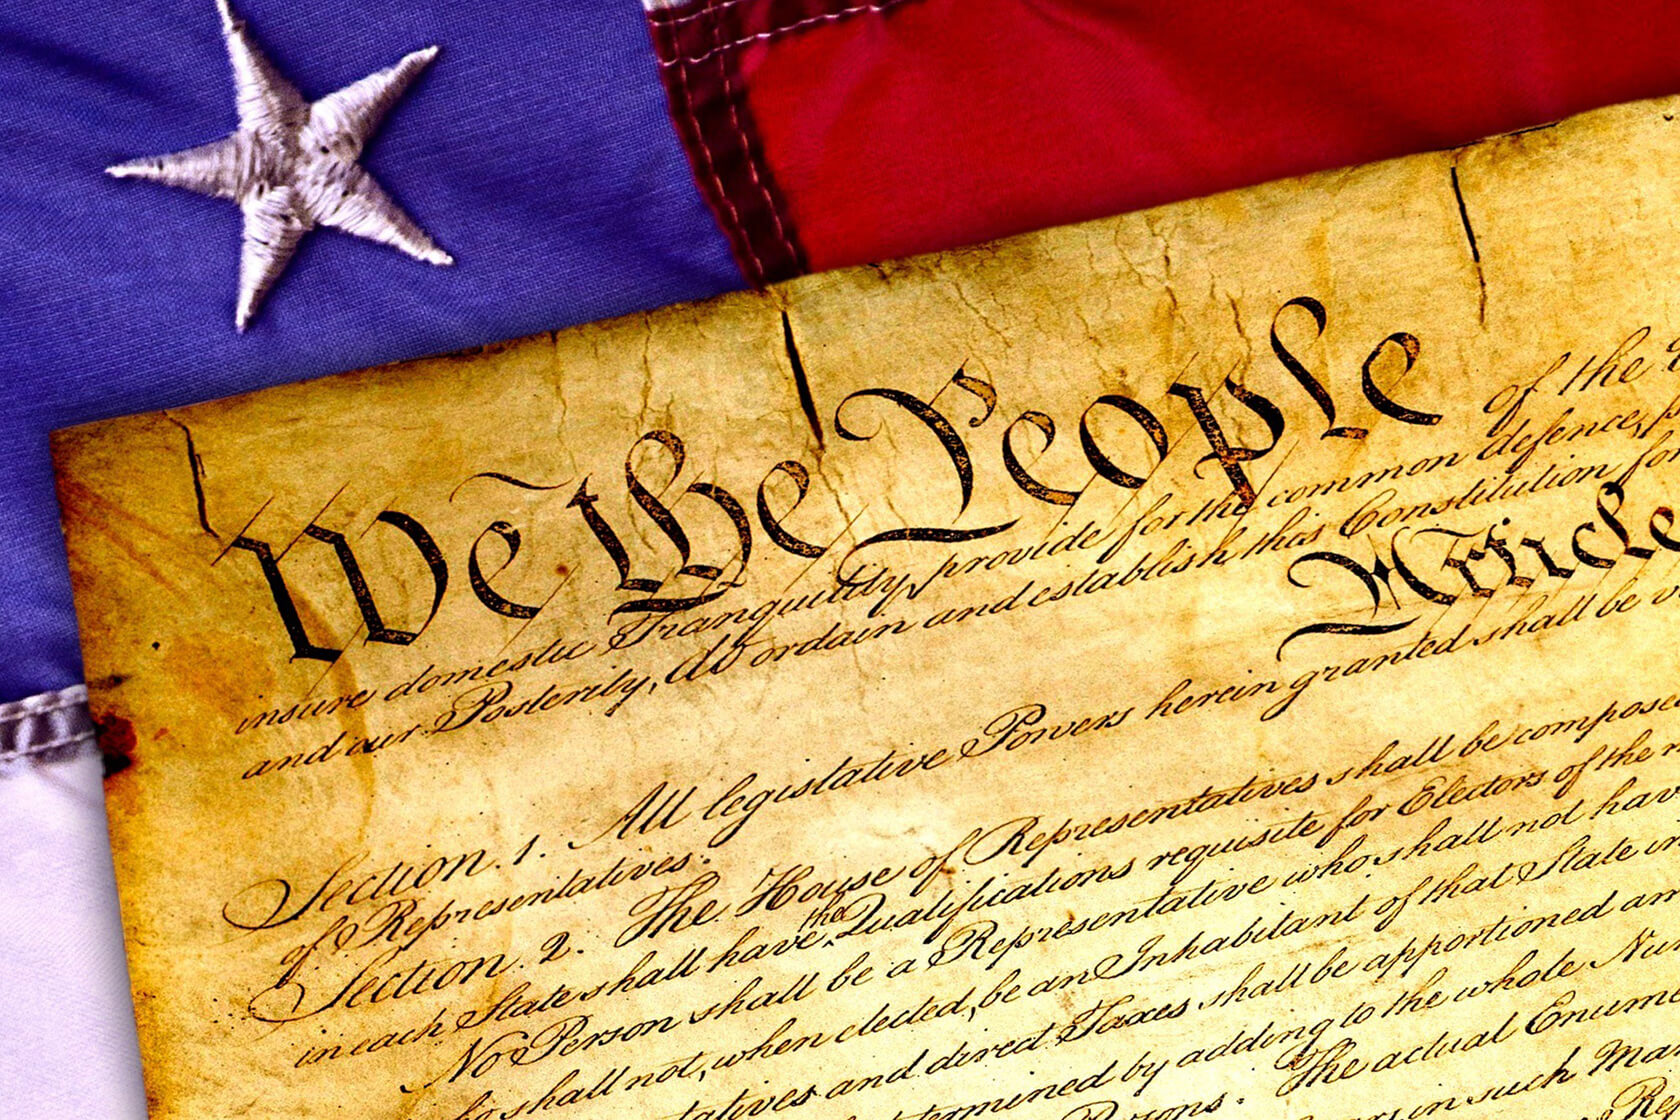 Image of the Constitution of the United States of America.